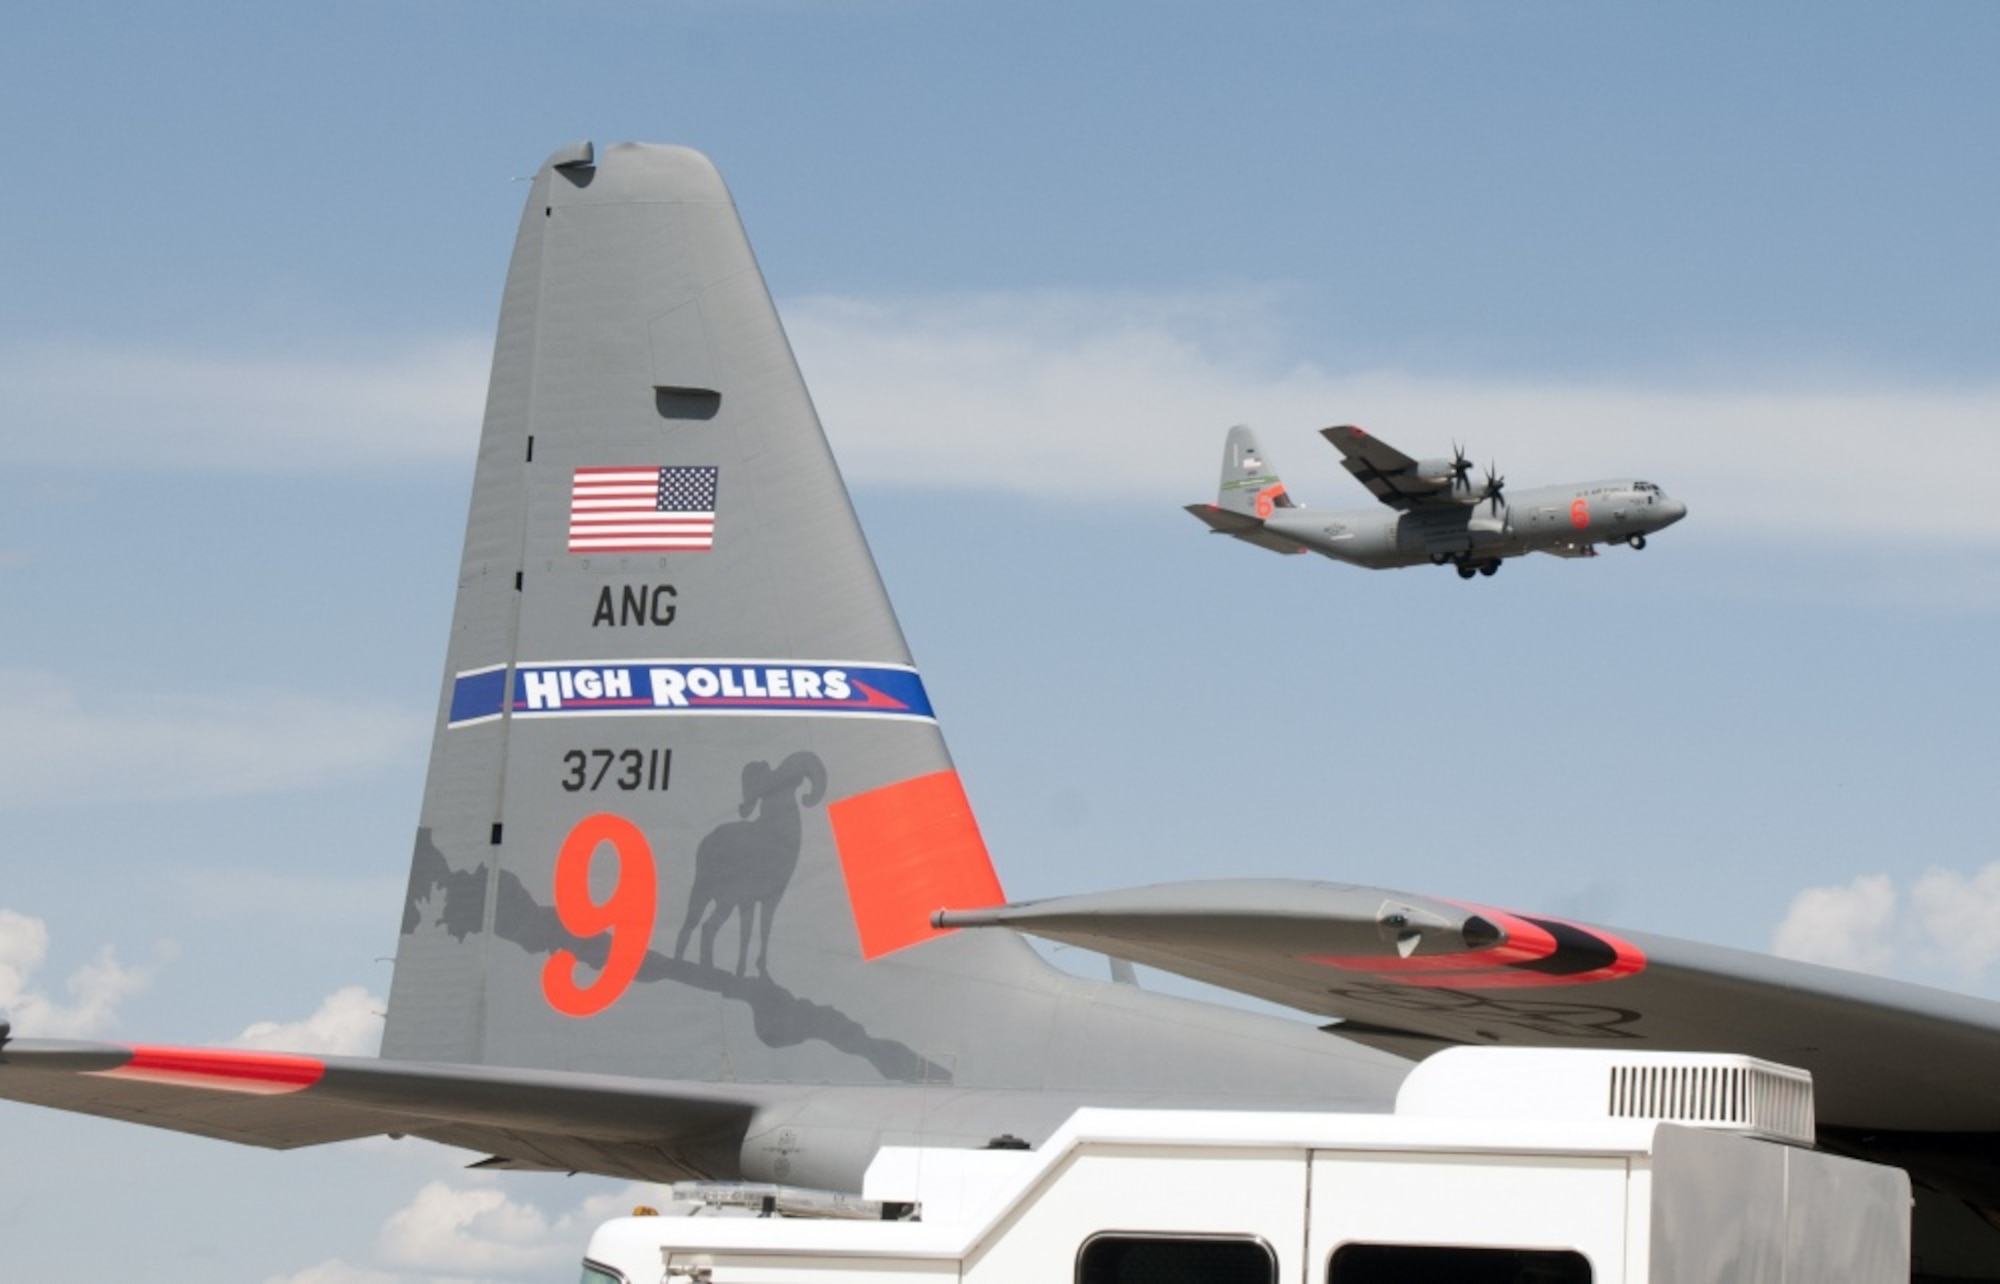 A California Air National Guard C-130 Hercules flies by a Nevada Air National Guard C-130 during this week's Modular Airborne Fire Fighting System training and certification in Boise, Idaho. More than 400 personnel of four C-130 Guard and Reserve units — from California, Colorado, Nevada and Wyoming, making up the Air Expeditionary Group — are in Boise for the week-long wildfire training and certification sponsored by the U.S. Forest Service. (U.S. Air Force photo/Tech. Sgt.  Tech. Sgt. Emerson Marcus)